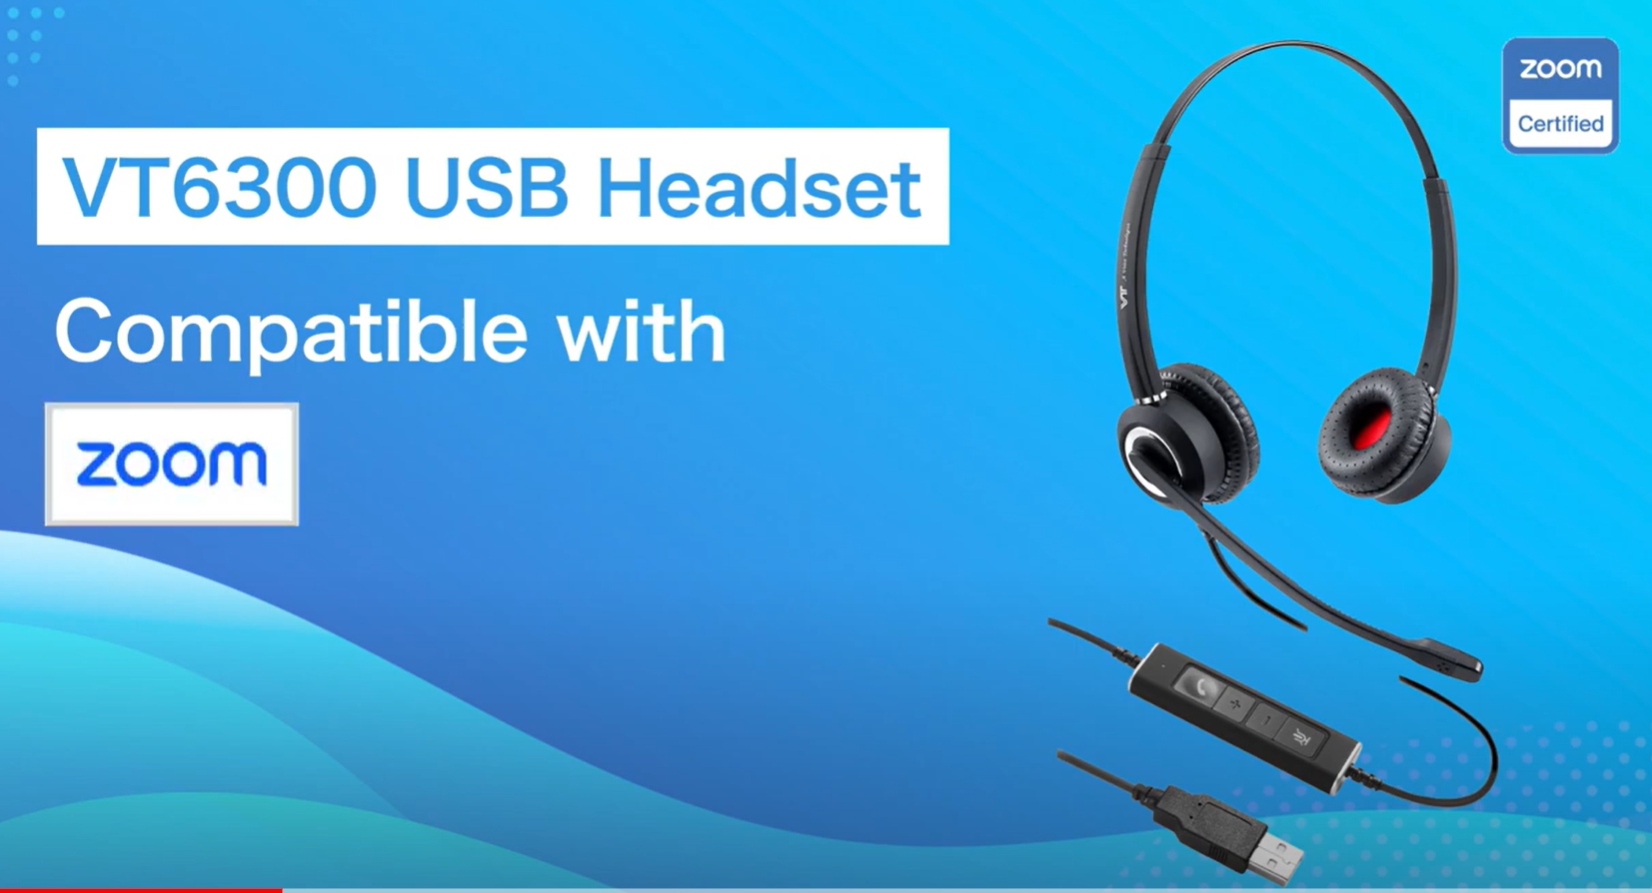 VT6300 USB Headset compatible with zoom